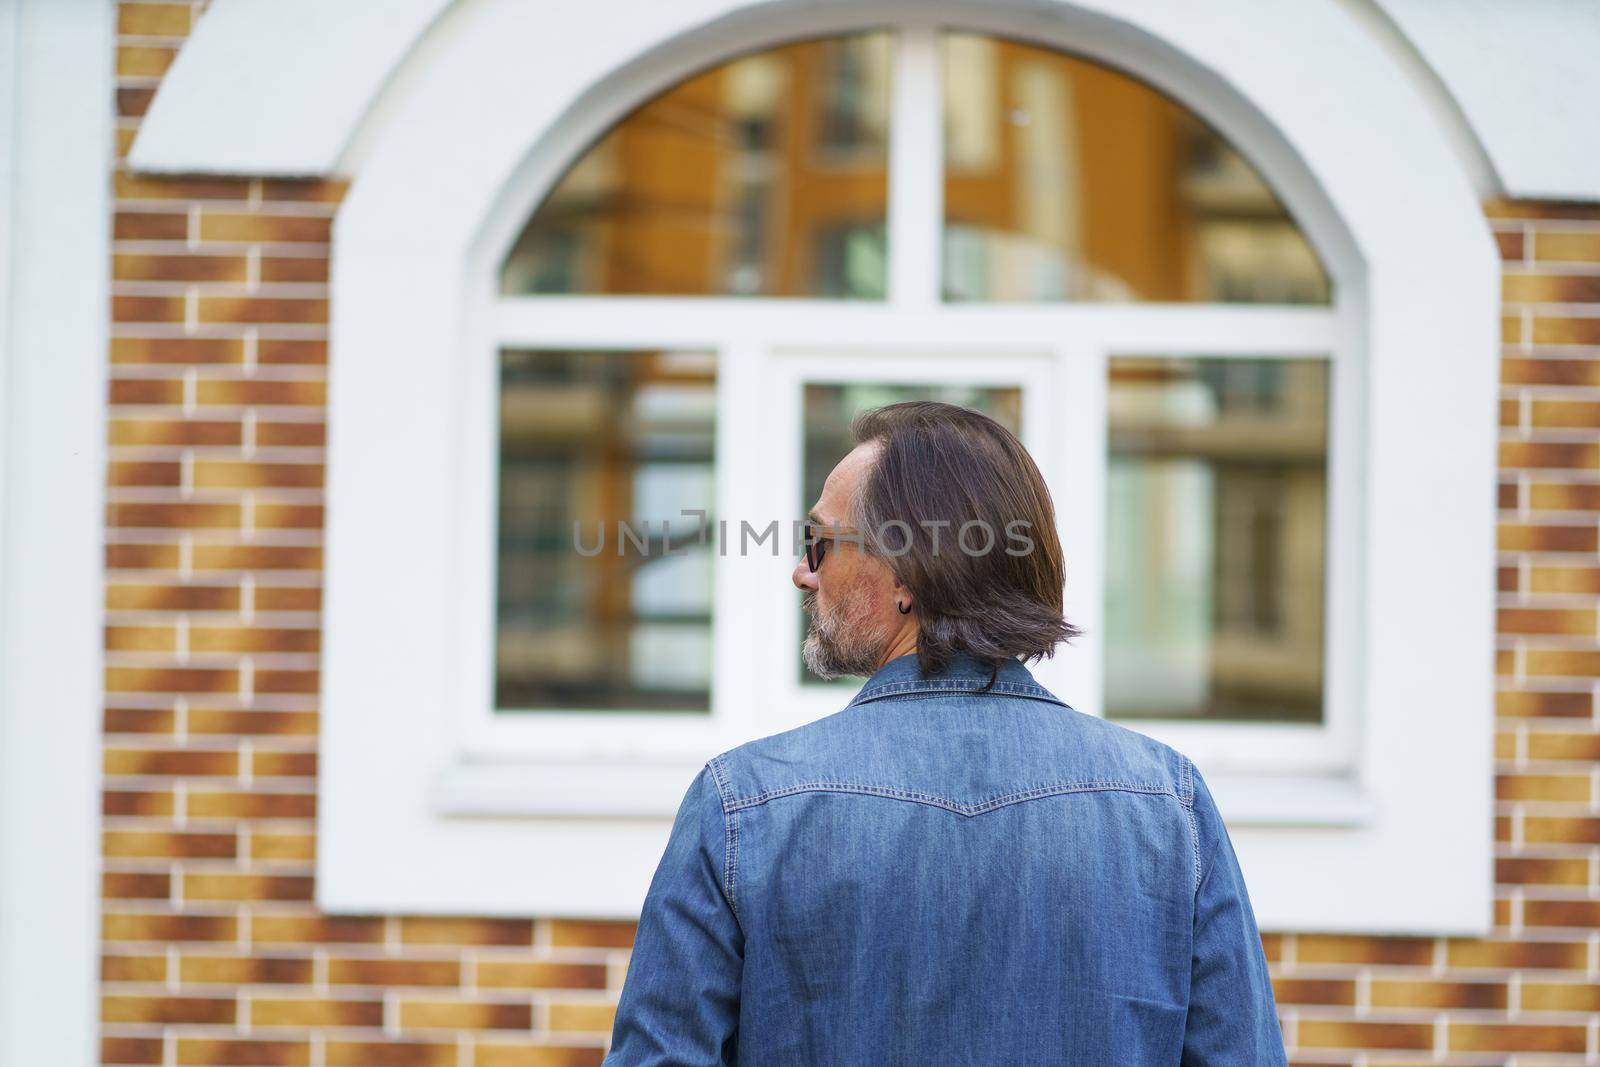 Close up rear view of a man standing alone in front old town building looking sideways while traveling in european cities during vacation time wearing denim jeans shirt. Travel concept.